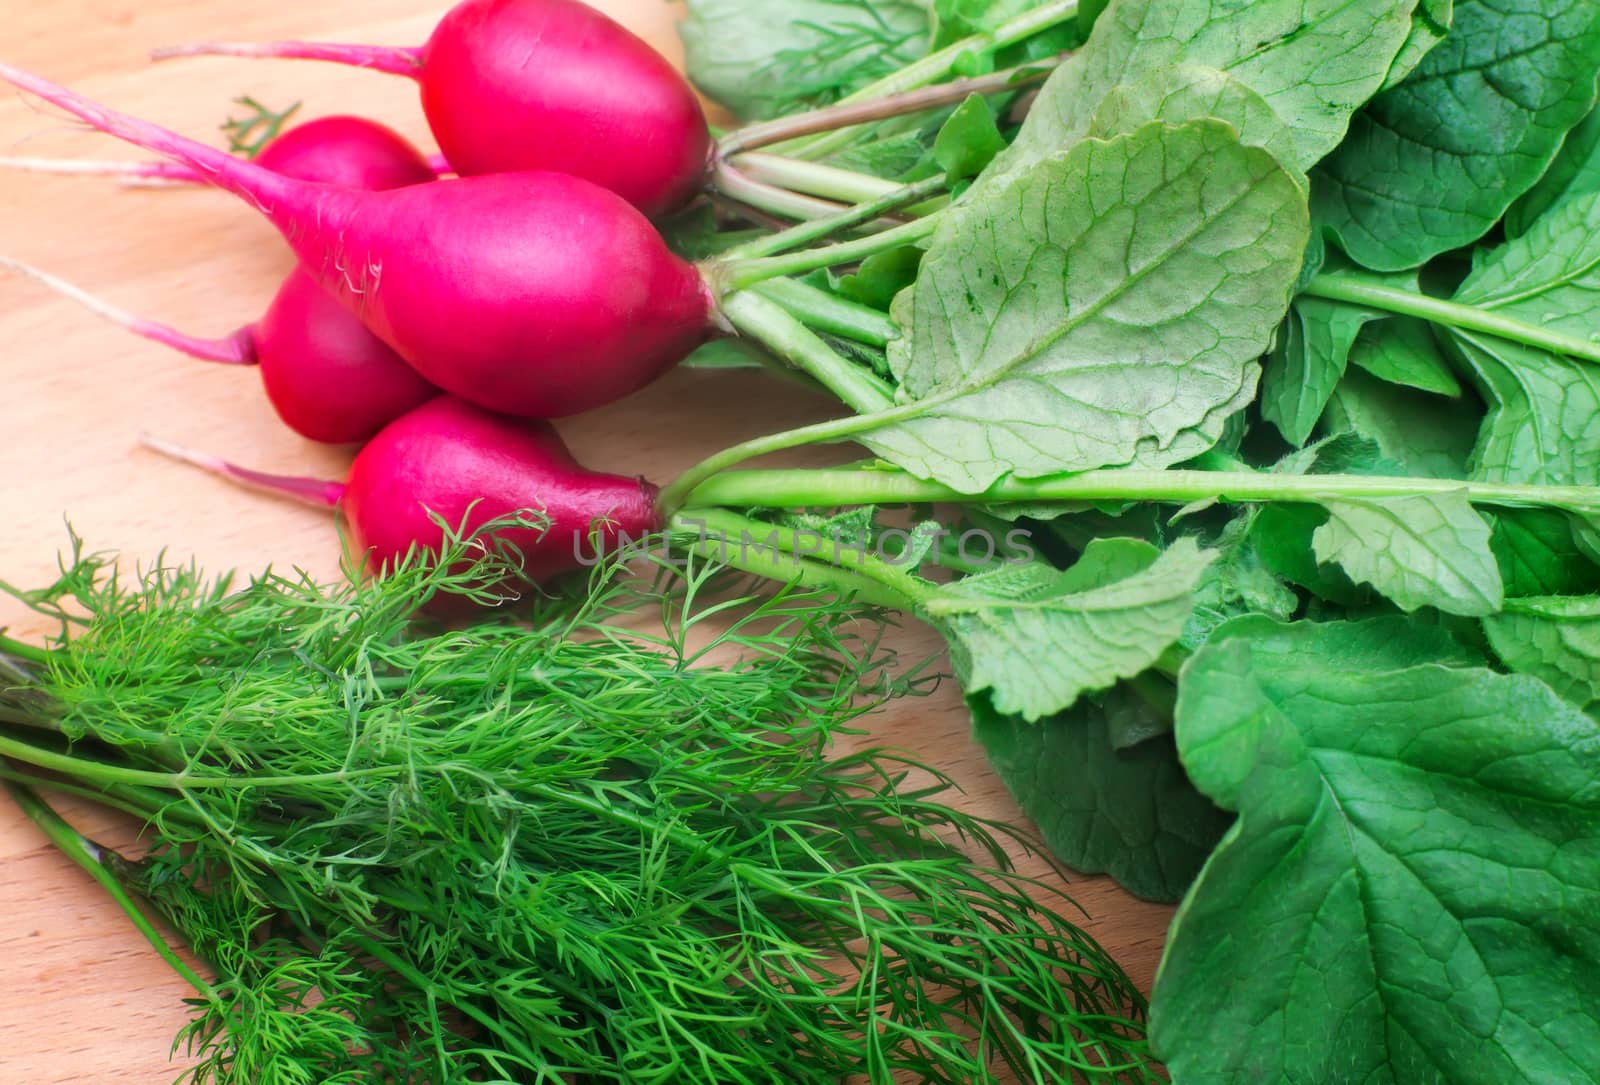 Vegetables for salad: bright red radish with green leaves and green twigs of dill. Lying on the kitchen blackboard.